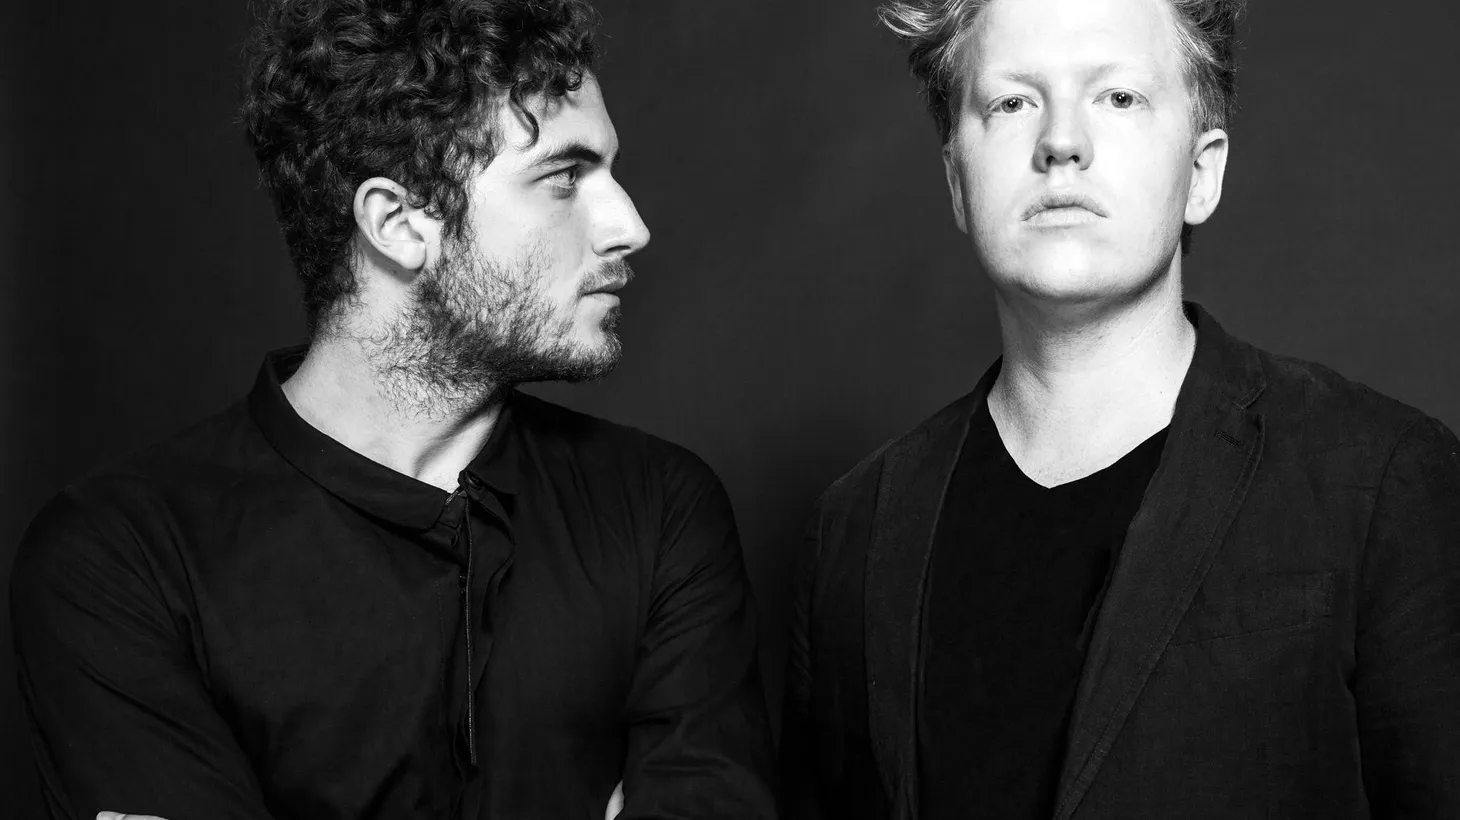 Laptop prodigy Nicolas Jaar and multi-instrumentalist Dave Harrington have joined forces as Darkside. They make their US live radio debut on MBE.